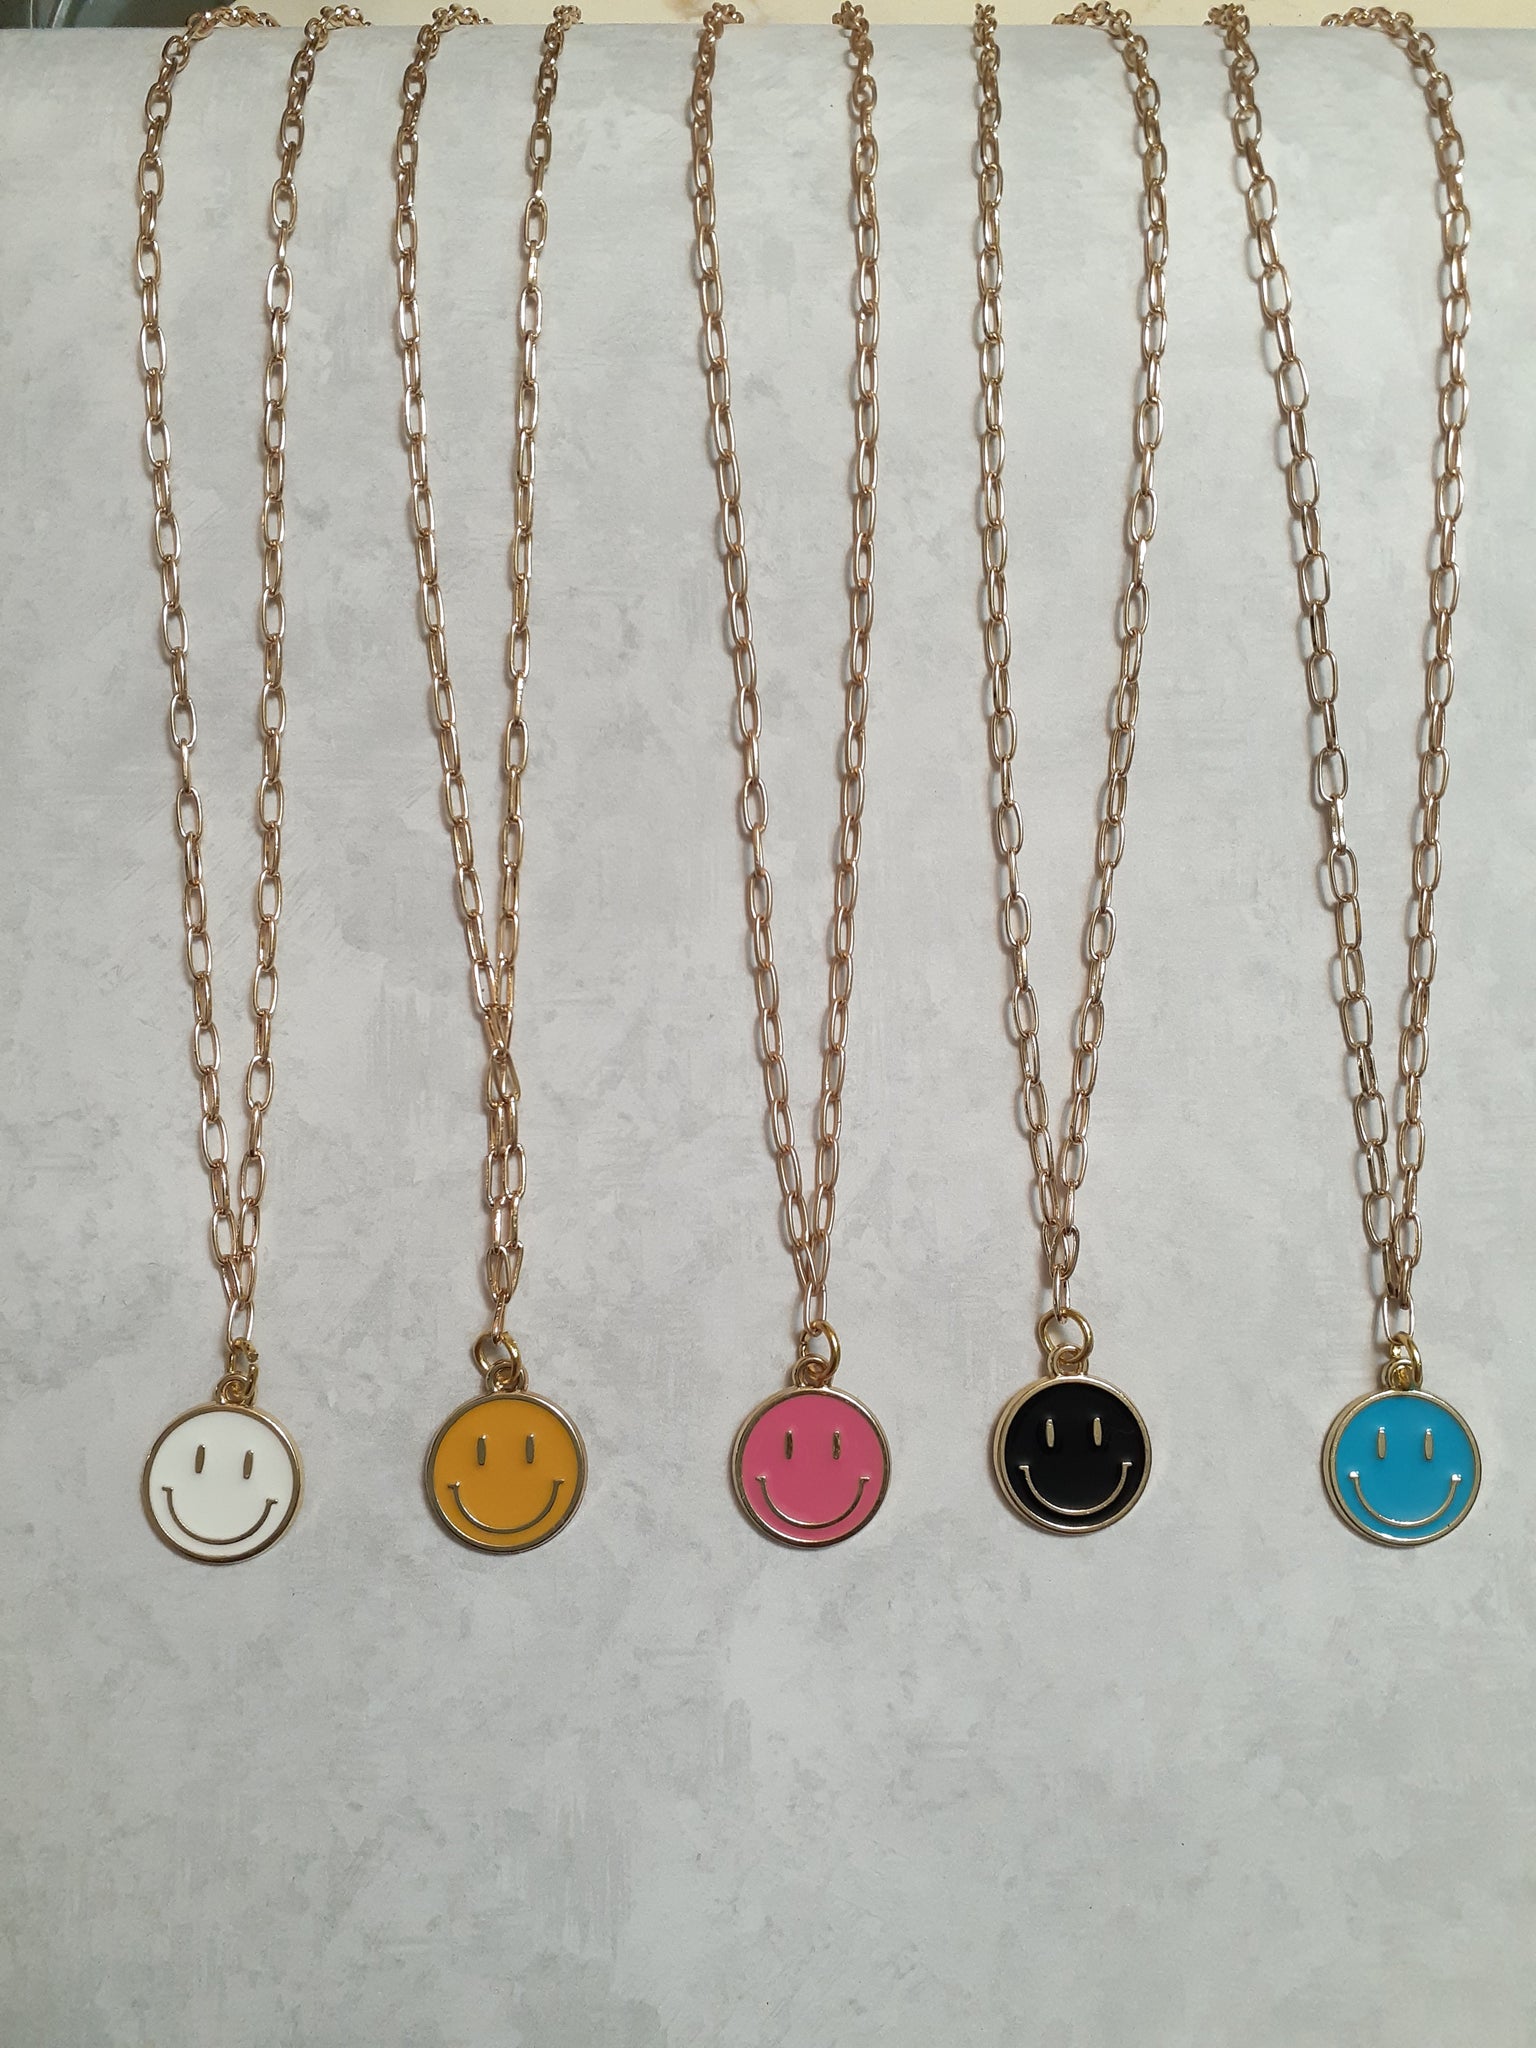 White Smiley Face Paperclip Necklaces, Gold Chain - Positive Happy Jewelry